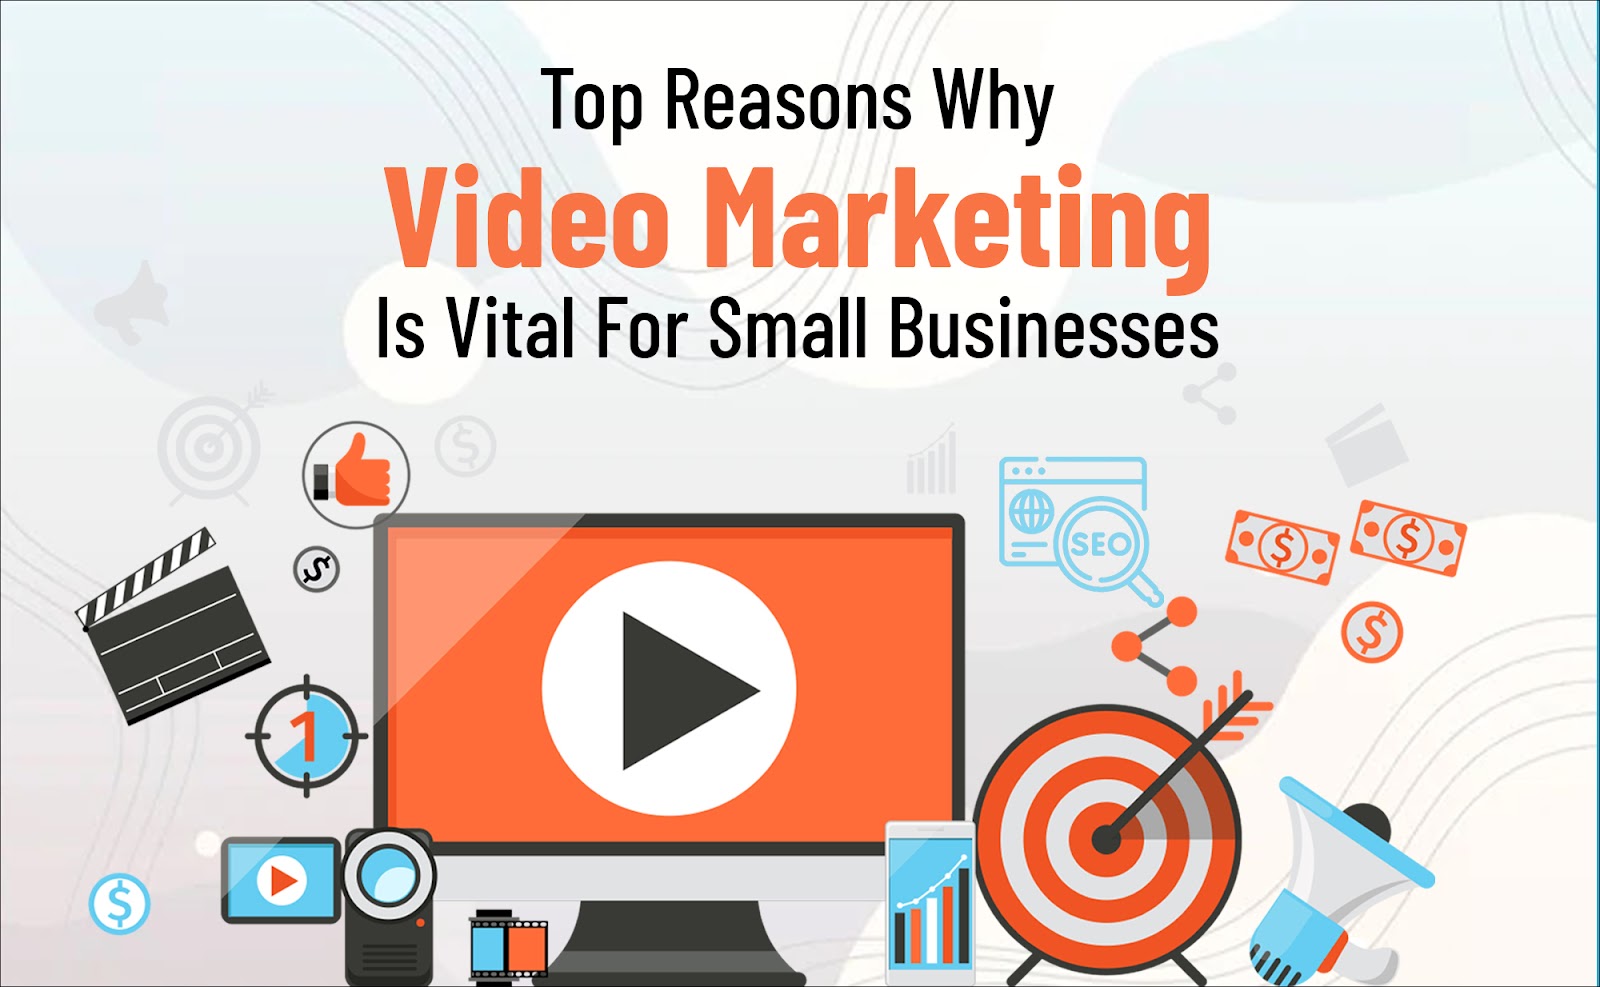 Top Reasons Why Video Marketing Is Vital For Small Businesses